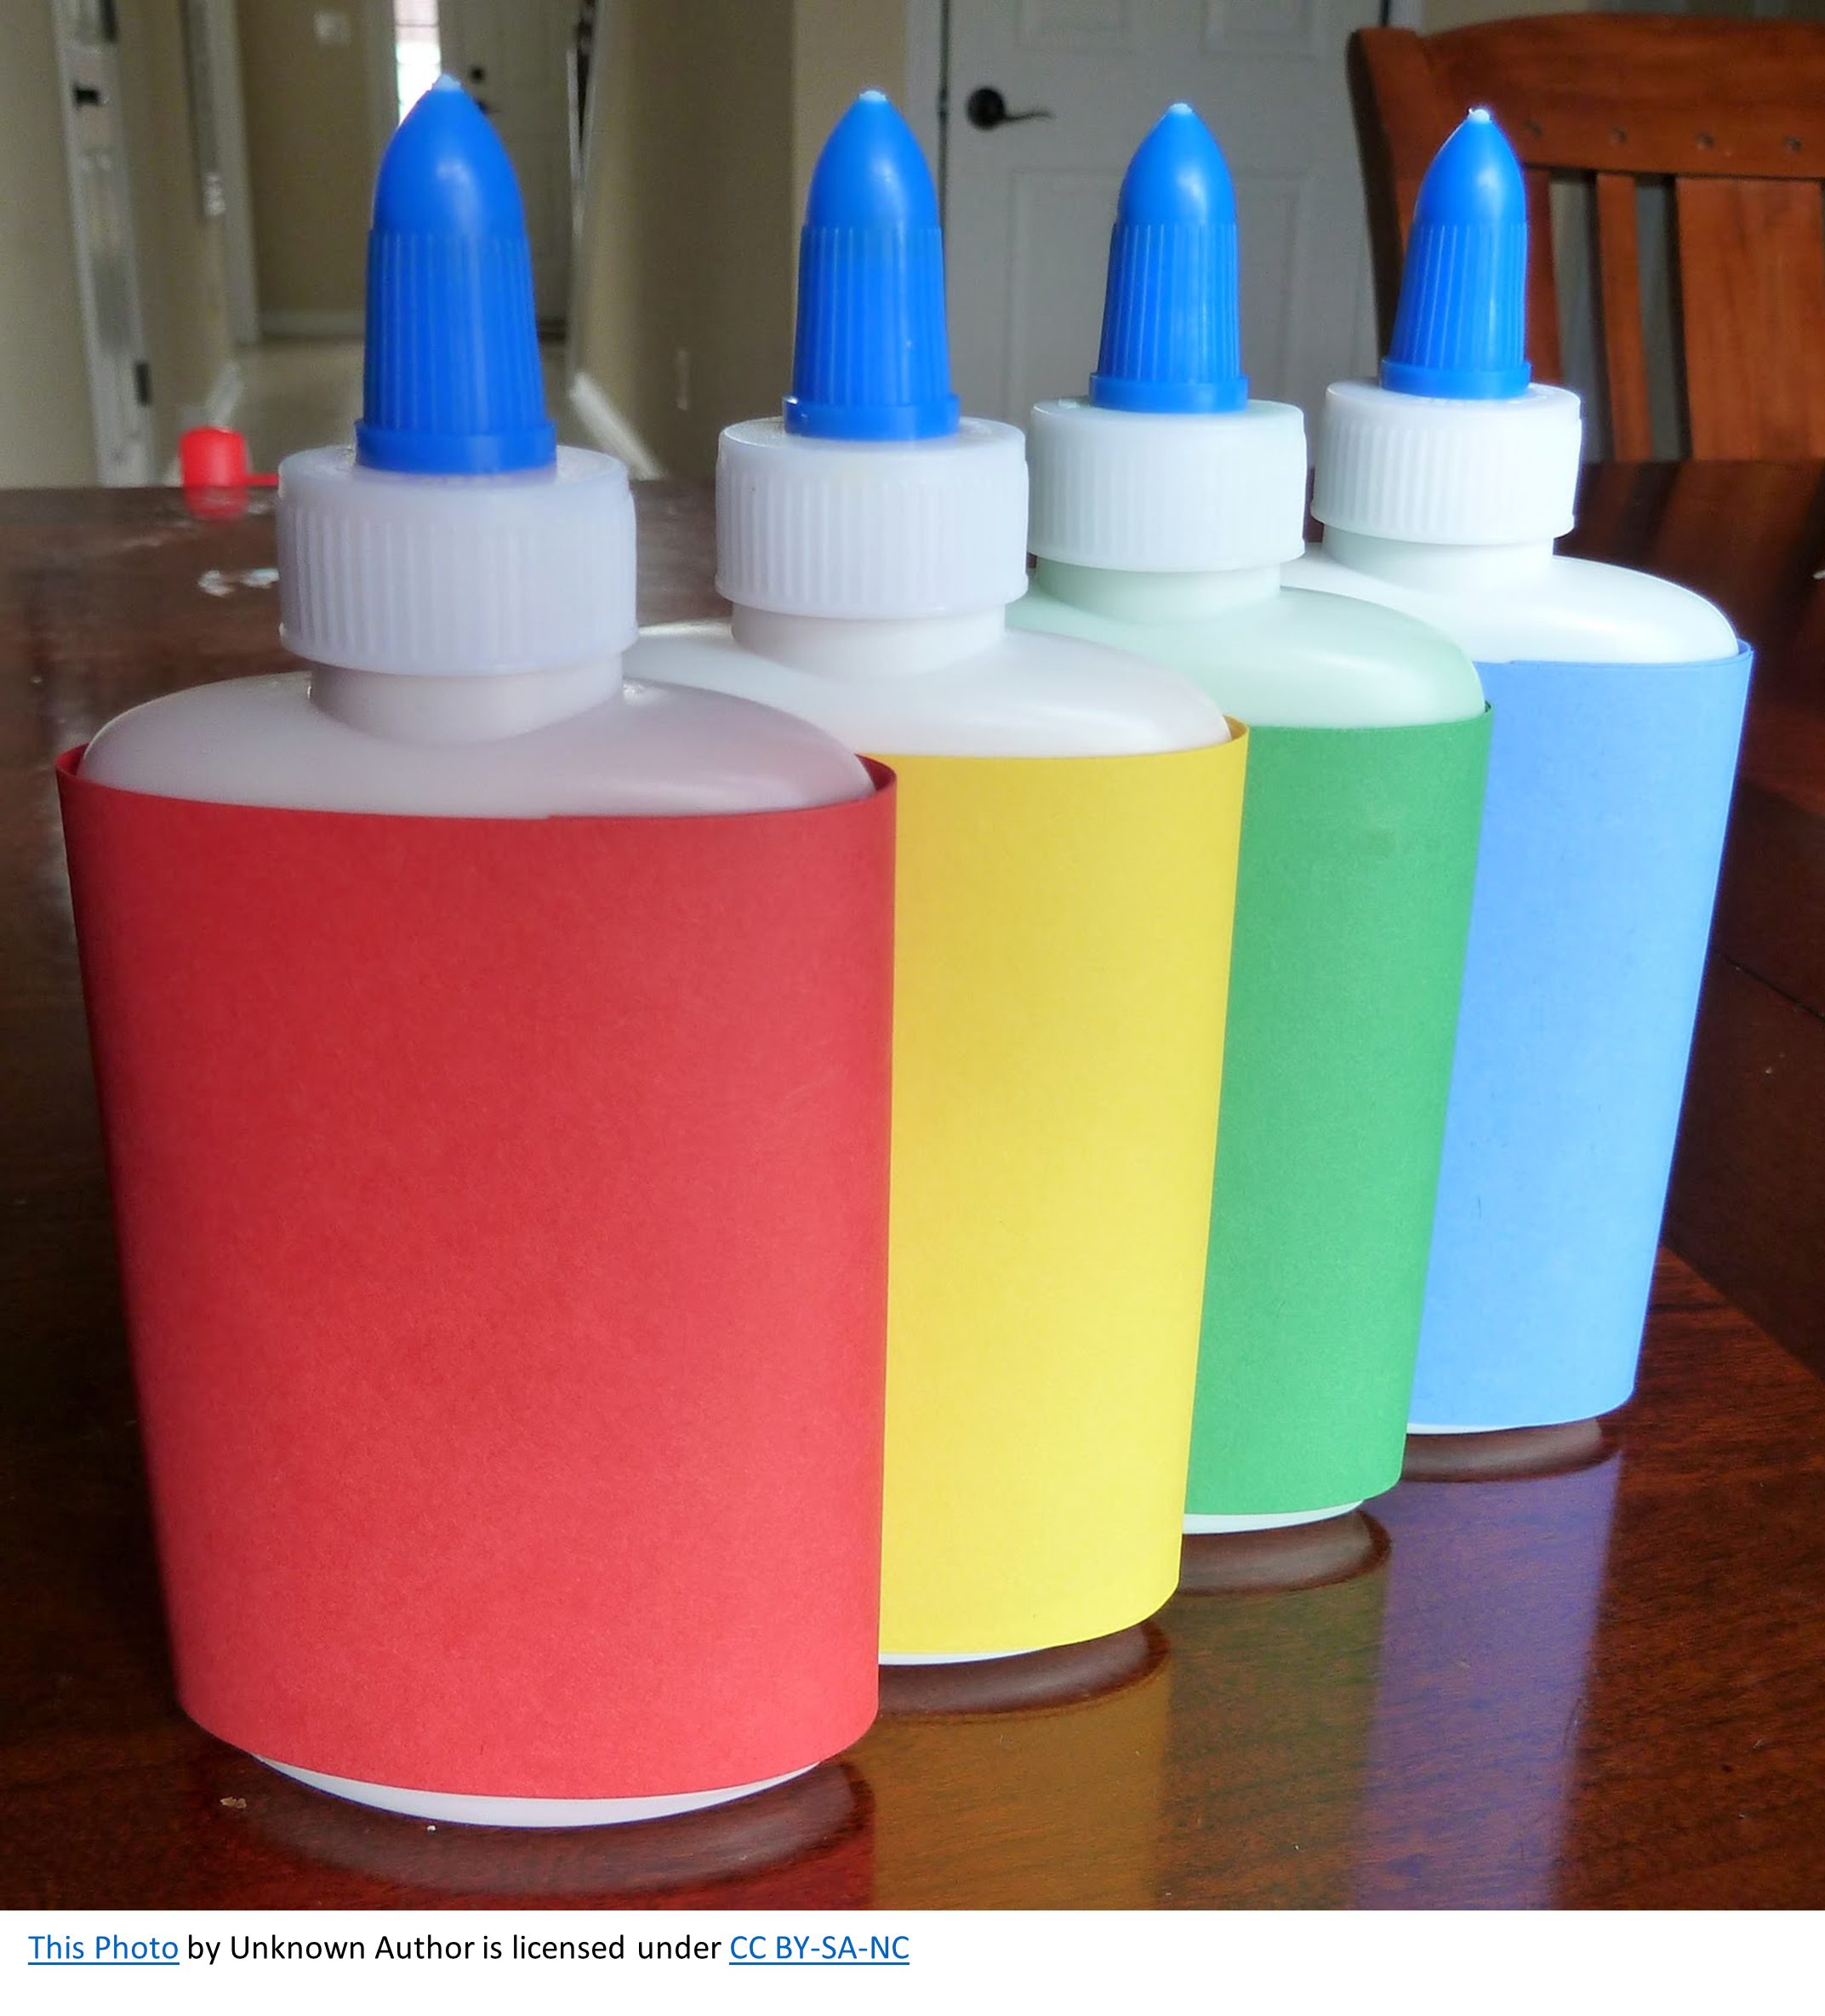 Four squeeze bottles of puff paint colored red, yellow, green, and blue.